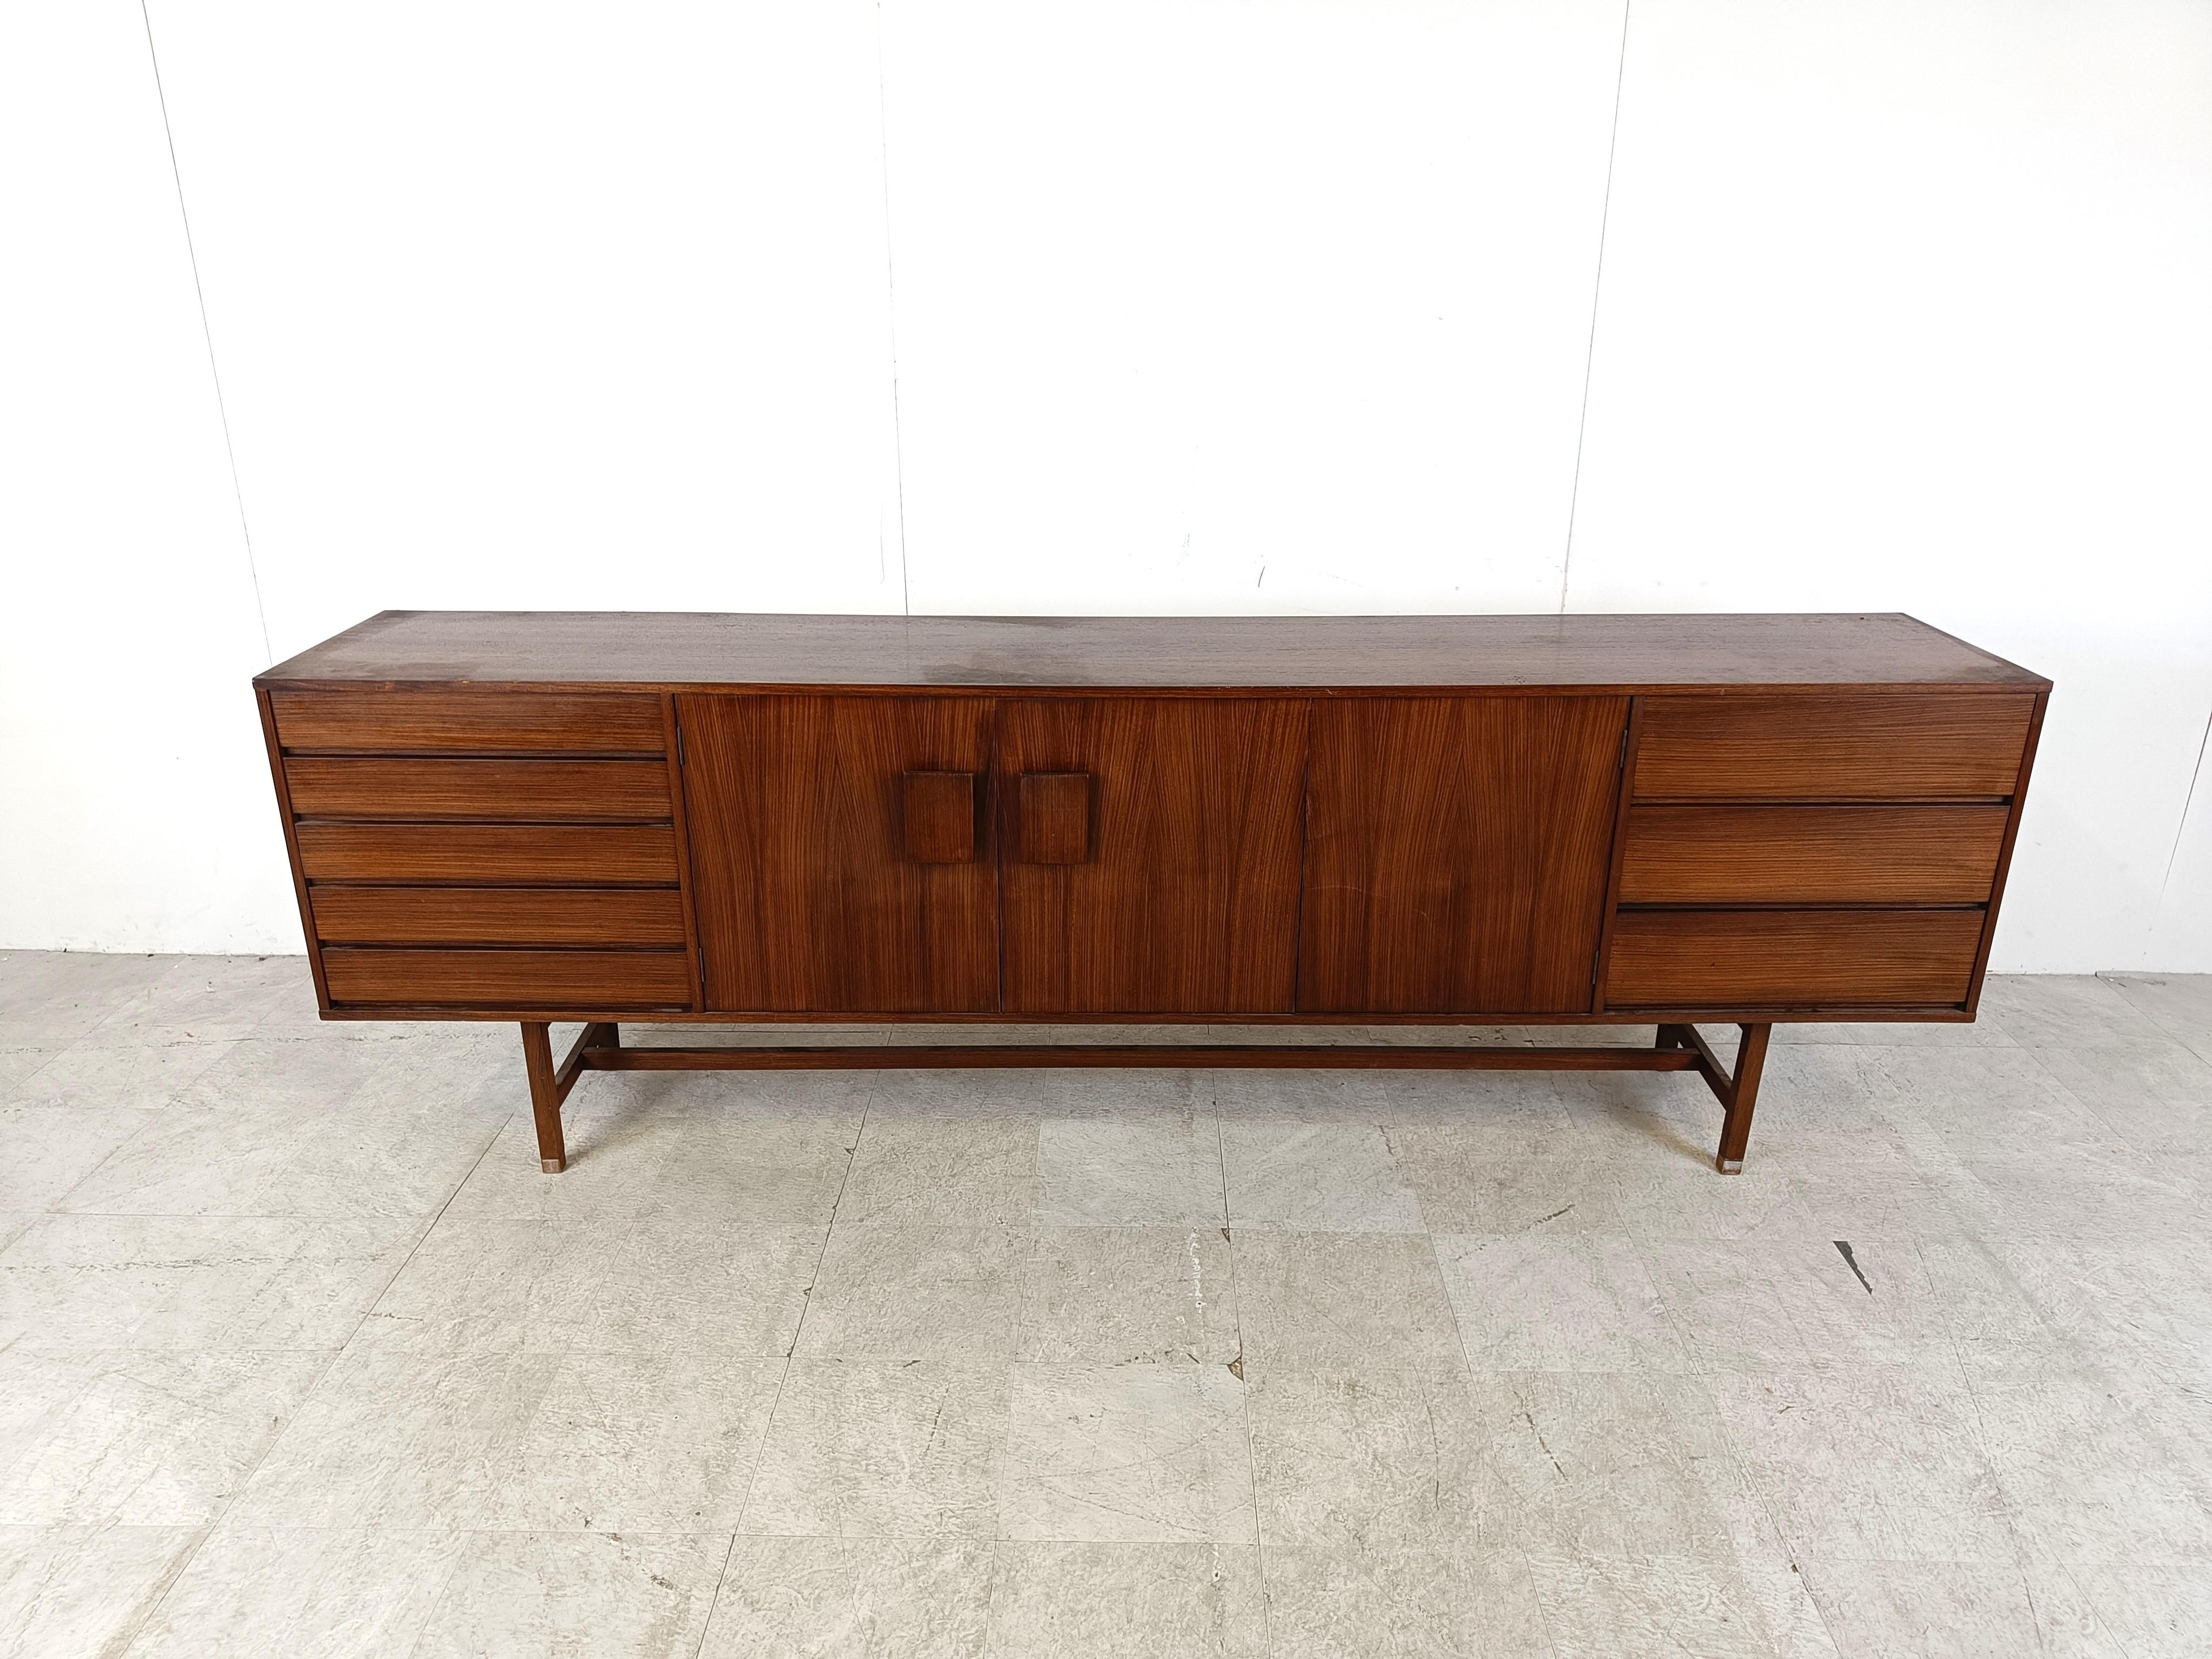 Beautiful teak mid century scandinavian design sideboard by Inger Klingenberg for Fristho.

It consists of 3 doors and 7 drawers in total, offering plenty of storage space.

Attractive design and well crafted sideboard.

Good condition

1960s -